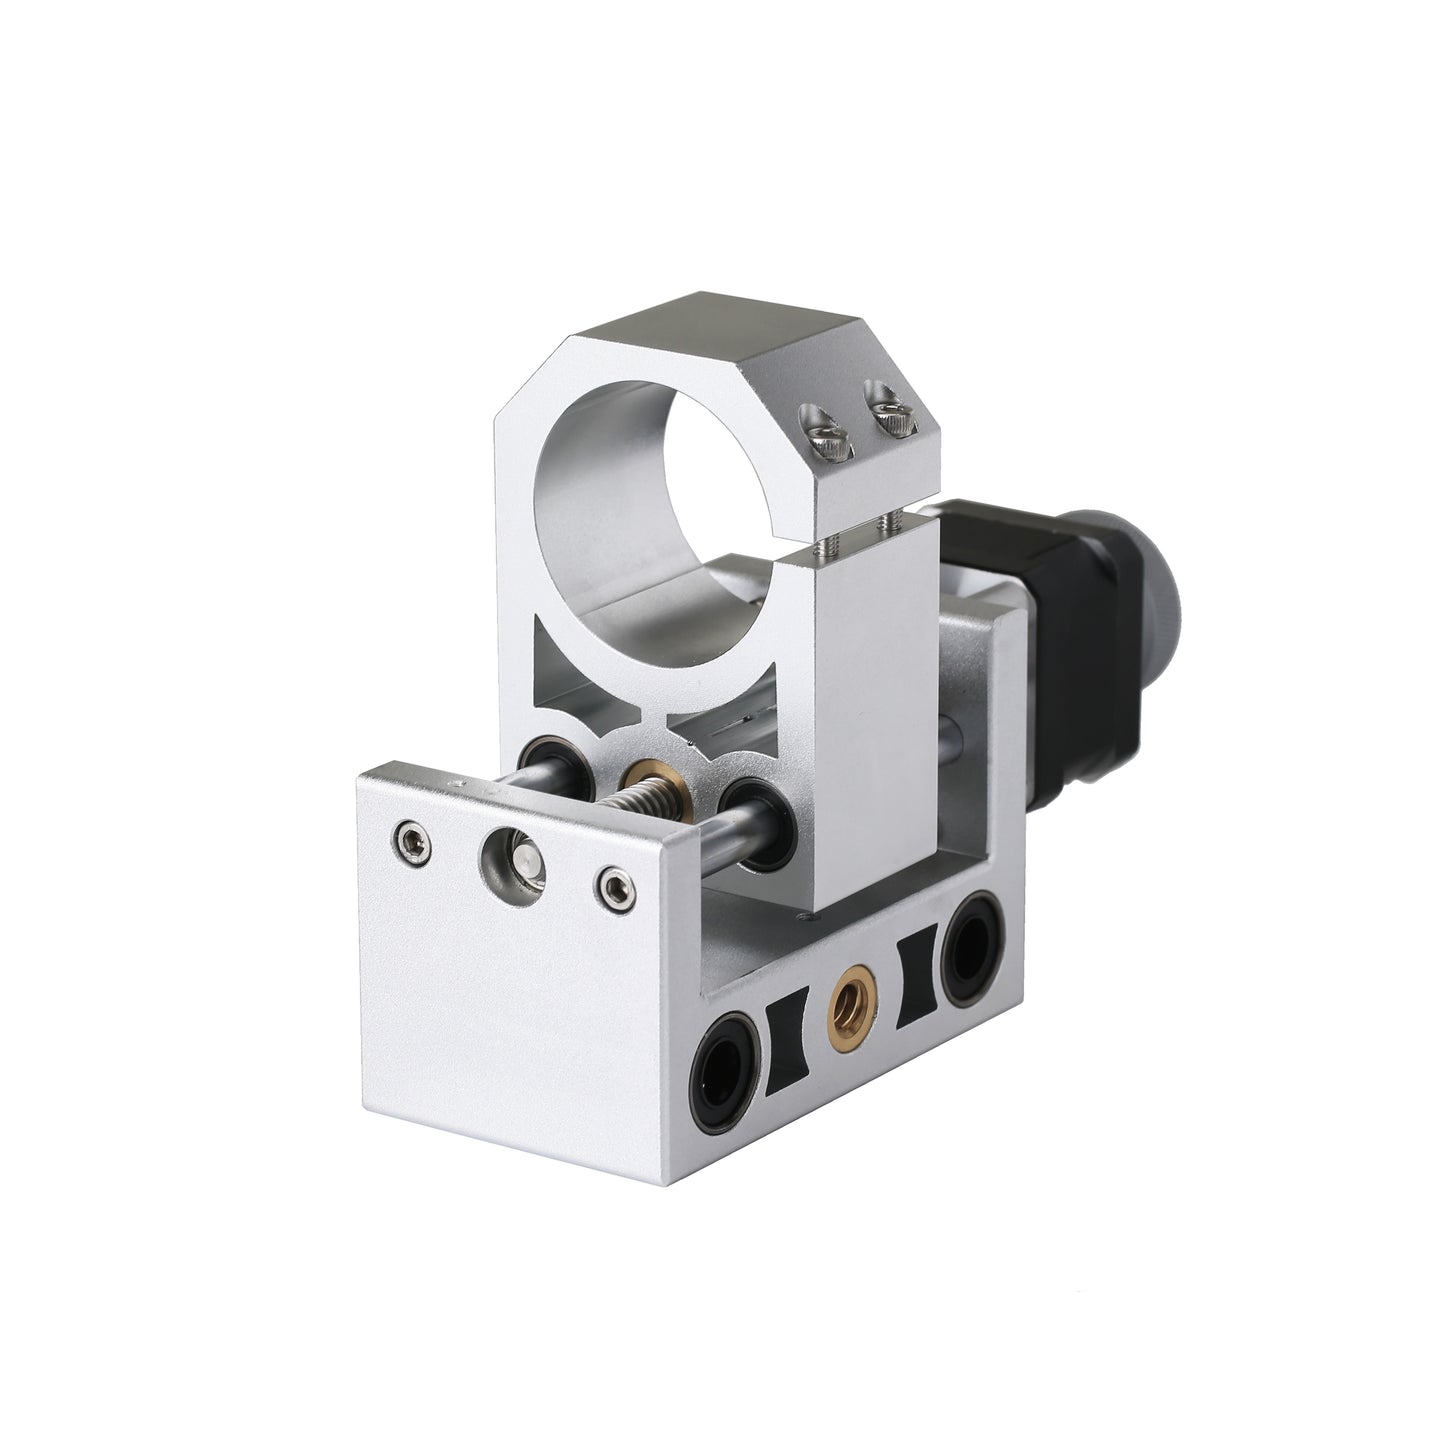 Mostics, Z-axis Part for CNC 3018 PRO, Not include Stepper Motor and Handwheel